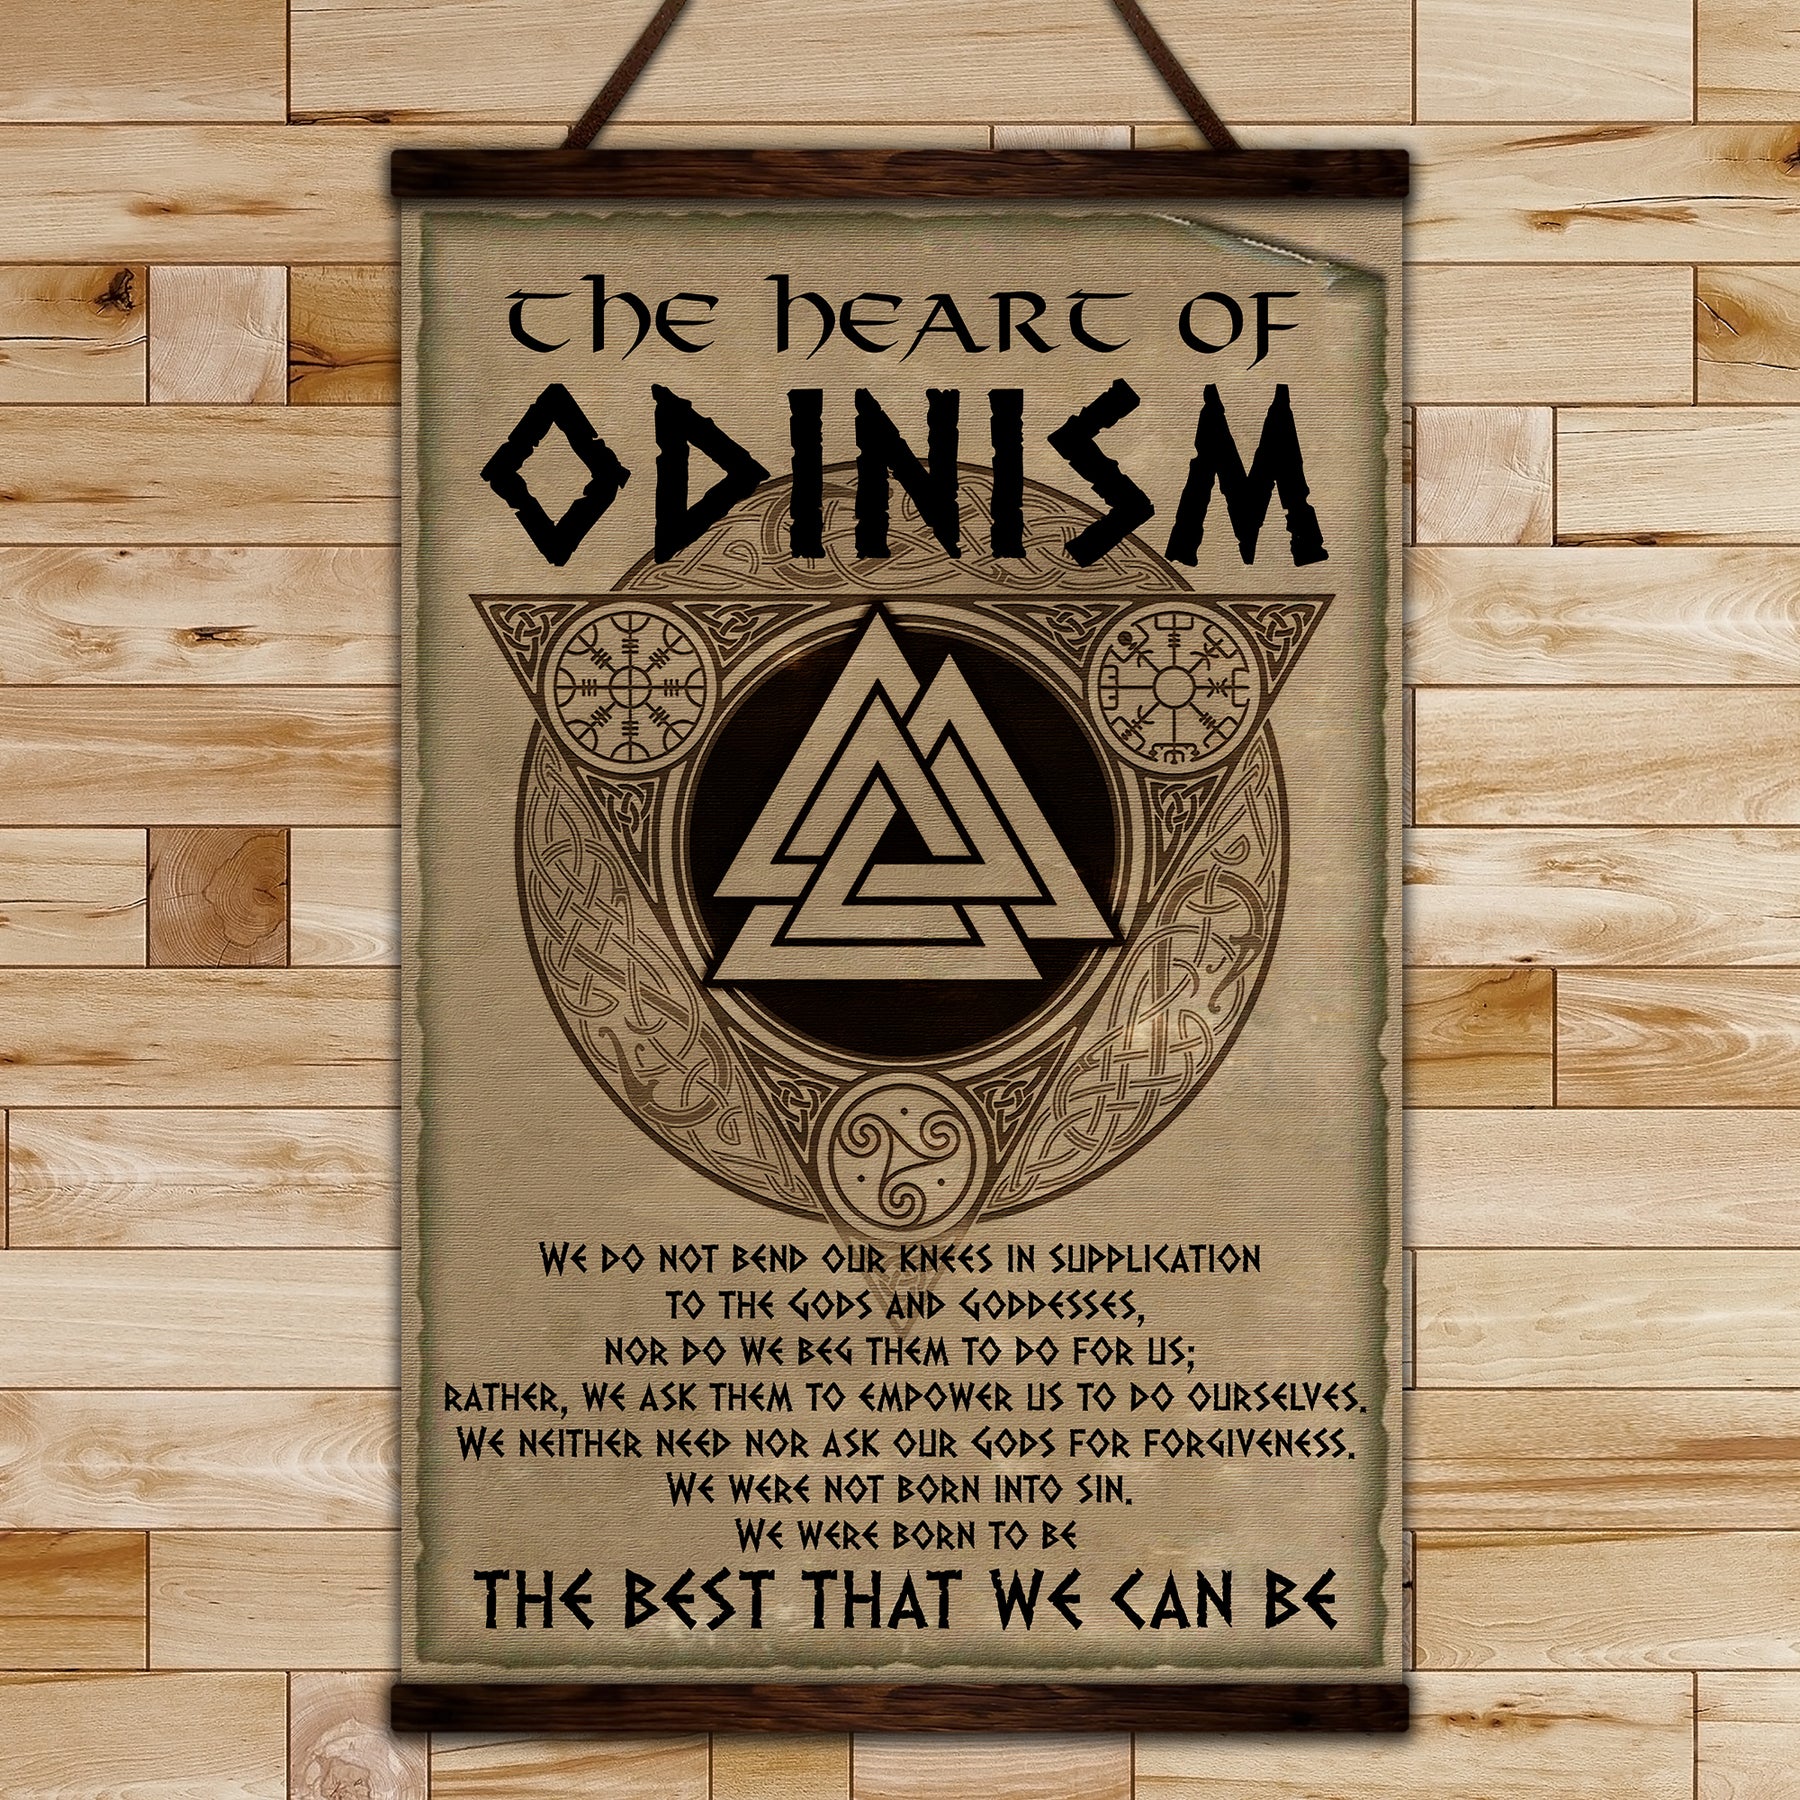 VK004 - Viking Poster - The Heart Of Odinism - Vertical Poster - Vertical Canvas